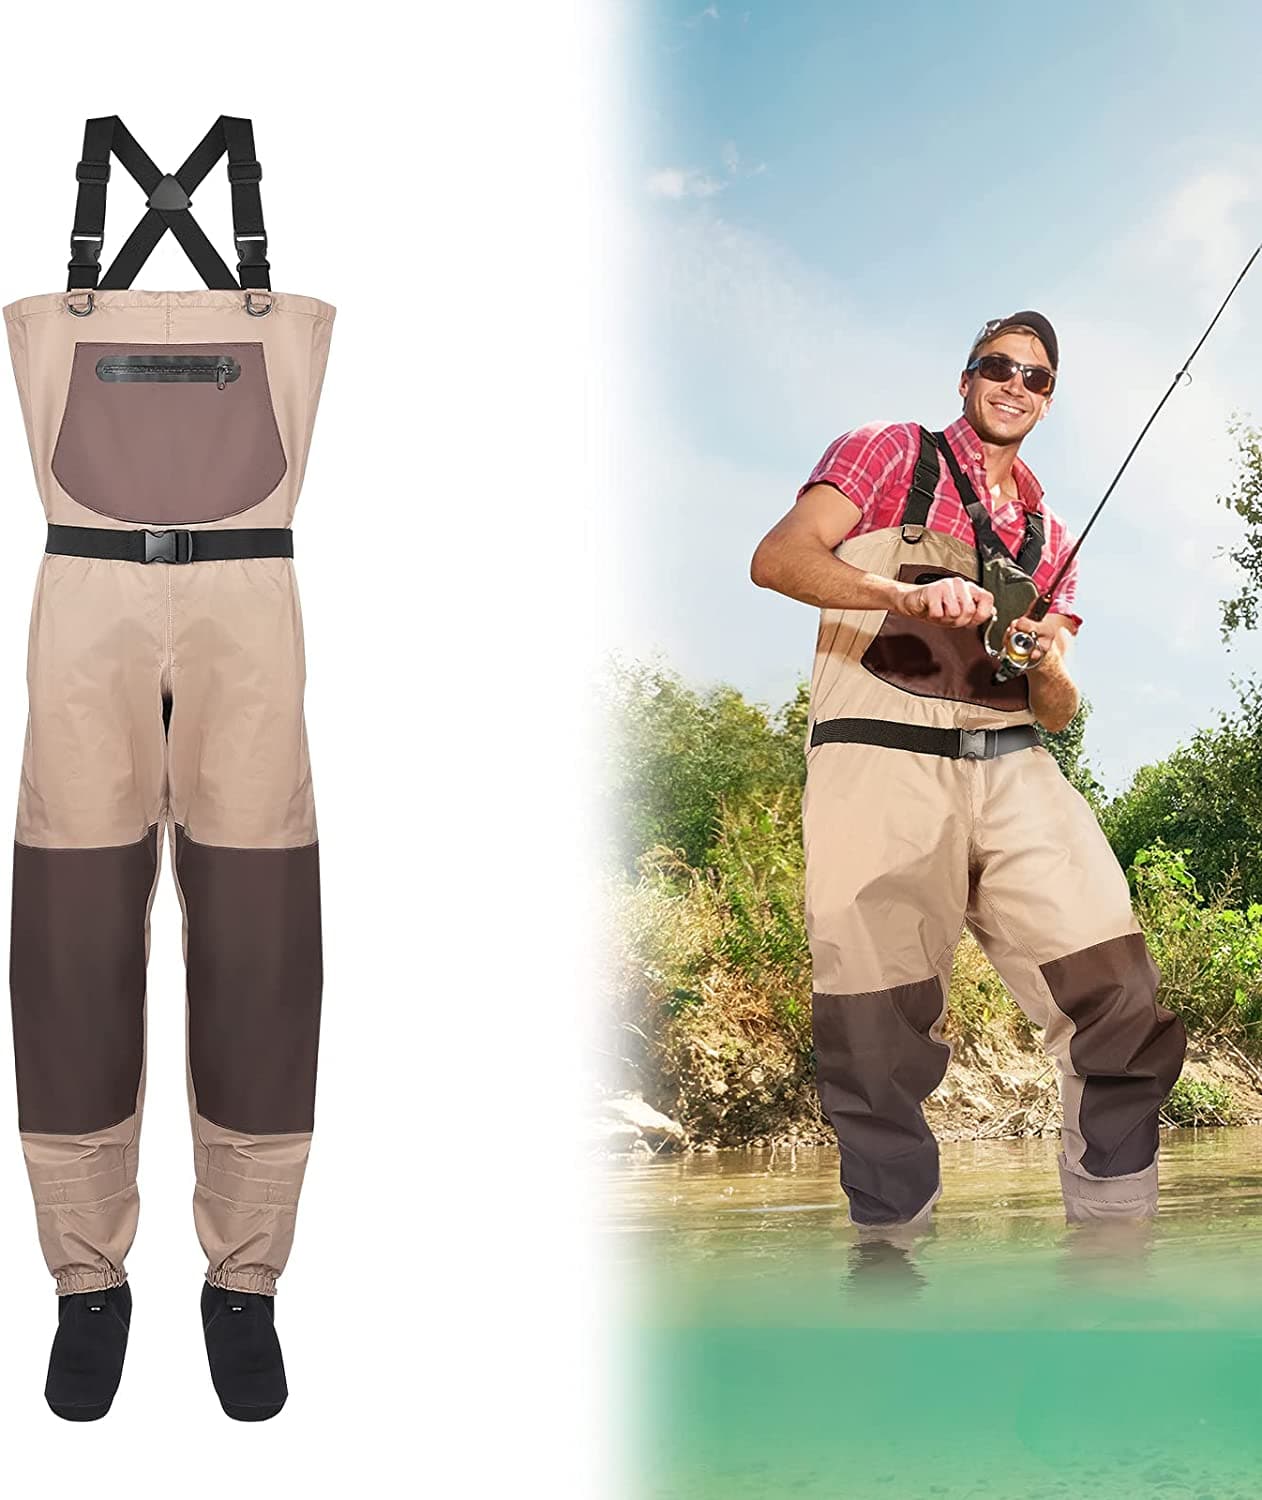 MZBF-454 mazume FULL OPEN BOOTS FOOT WADER (FELT SPIKE MODEL) breathable  waders for fly fishing, wading and belly boat (men)